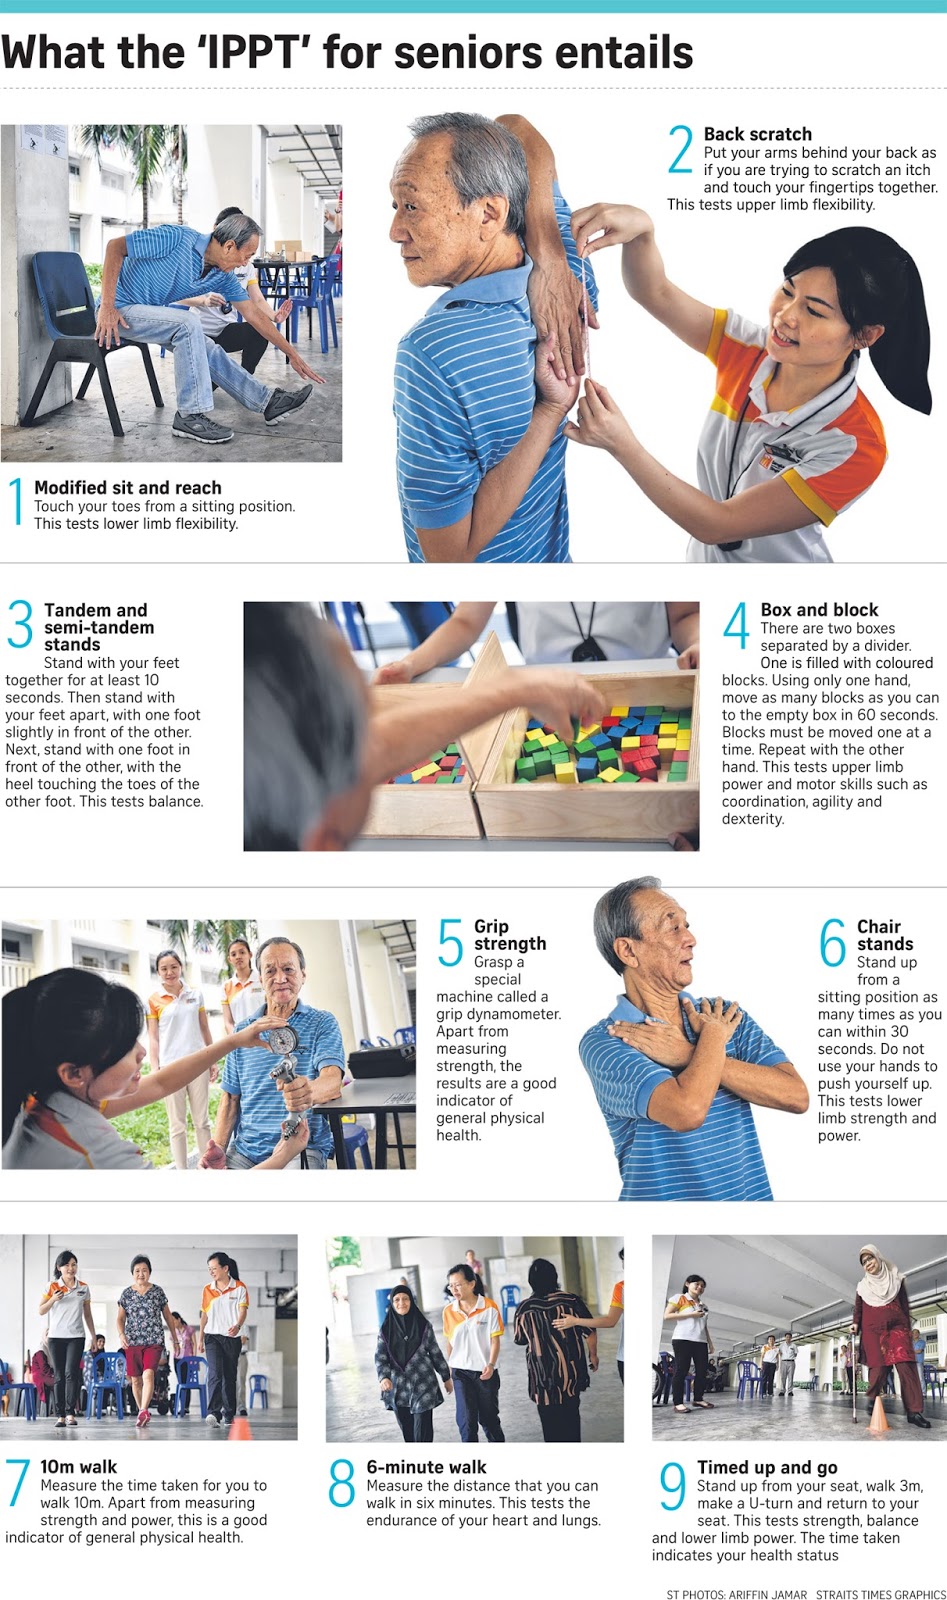 If Only Singaporeans Stopped to Think: IPPT for Seniors: Fitness